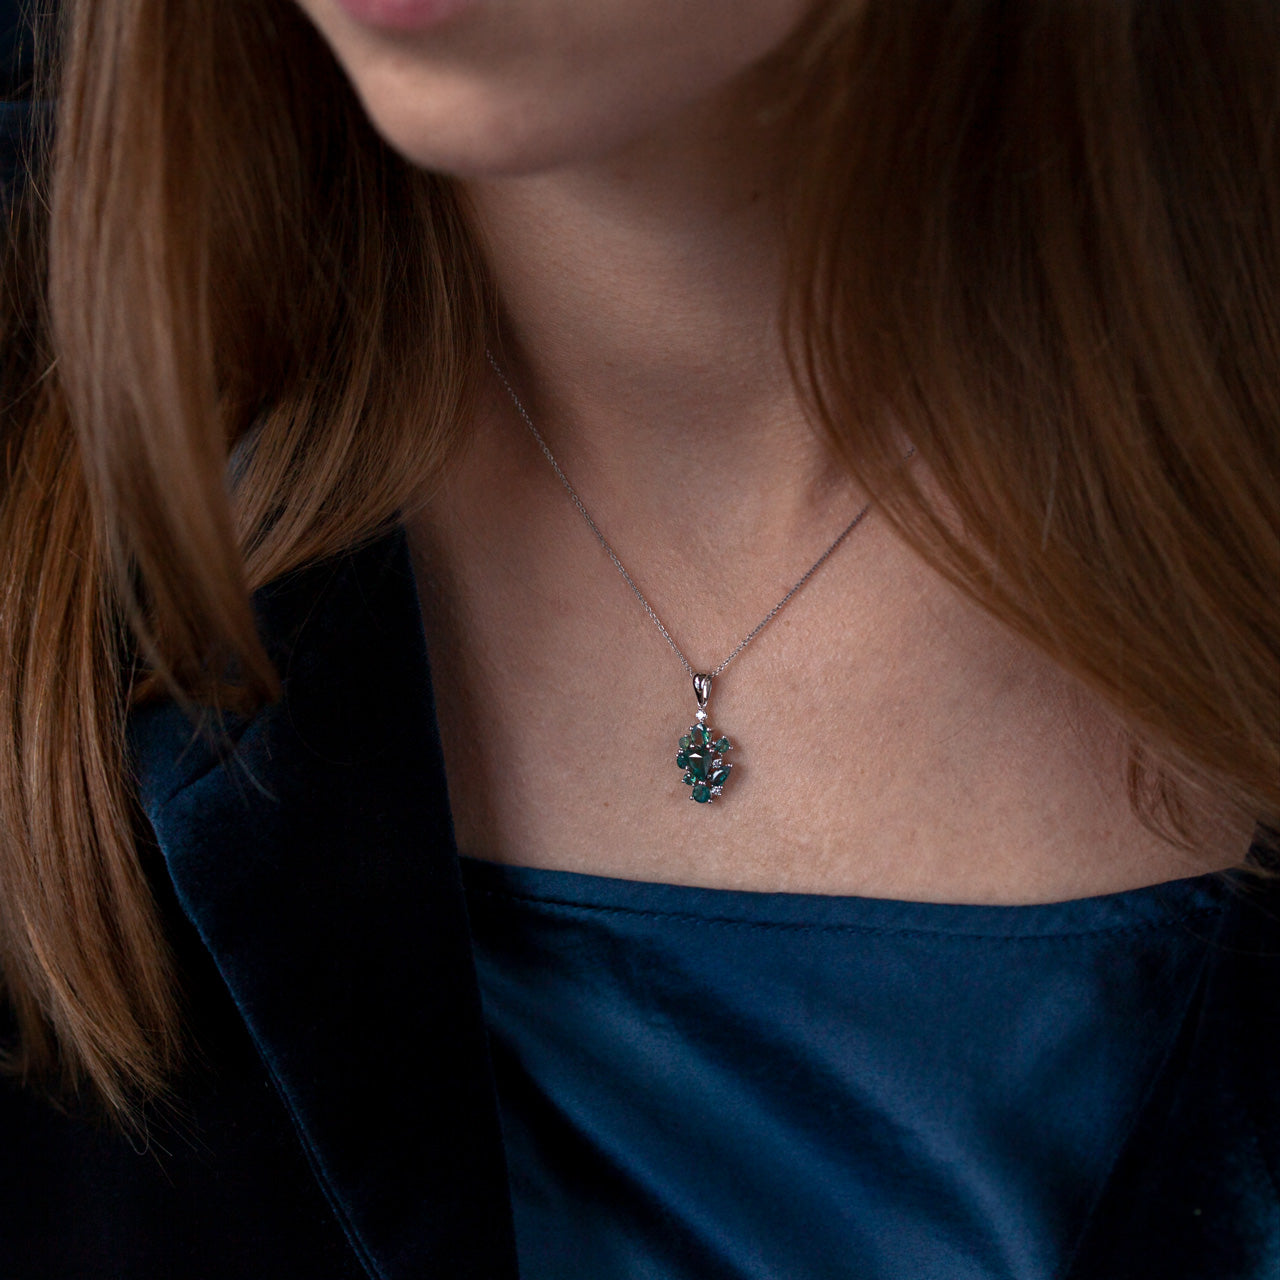 Woman in blue attire adorned with an 18k white gold alexandrite pendant